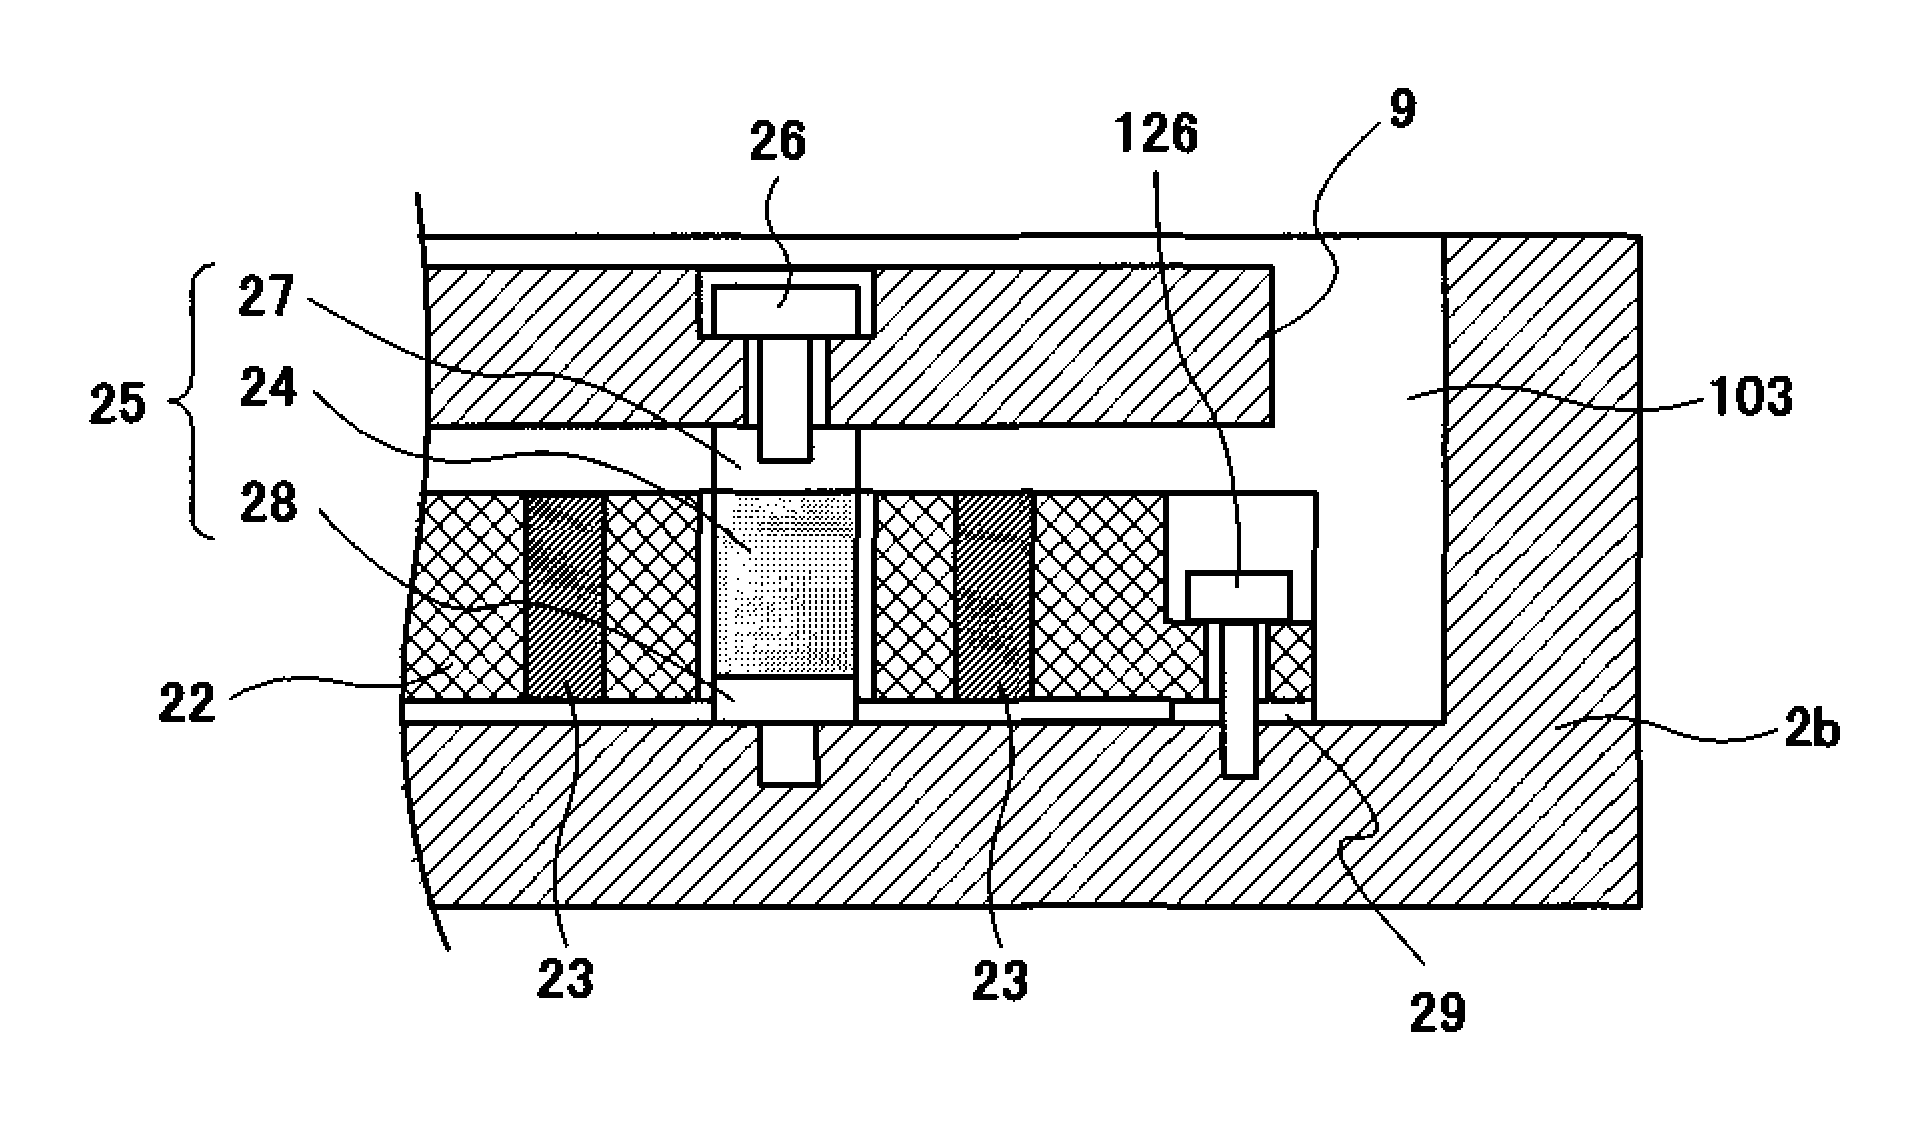 Structure for reducing noise in magnetic resonance imaging apparatus